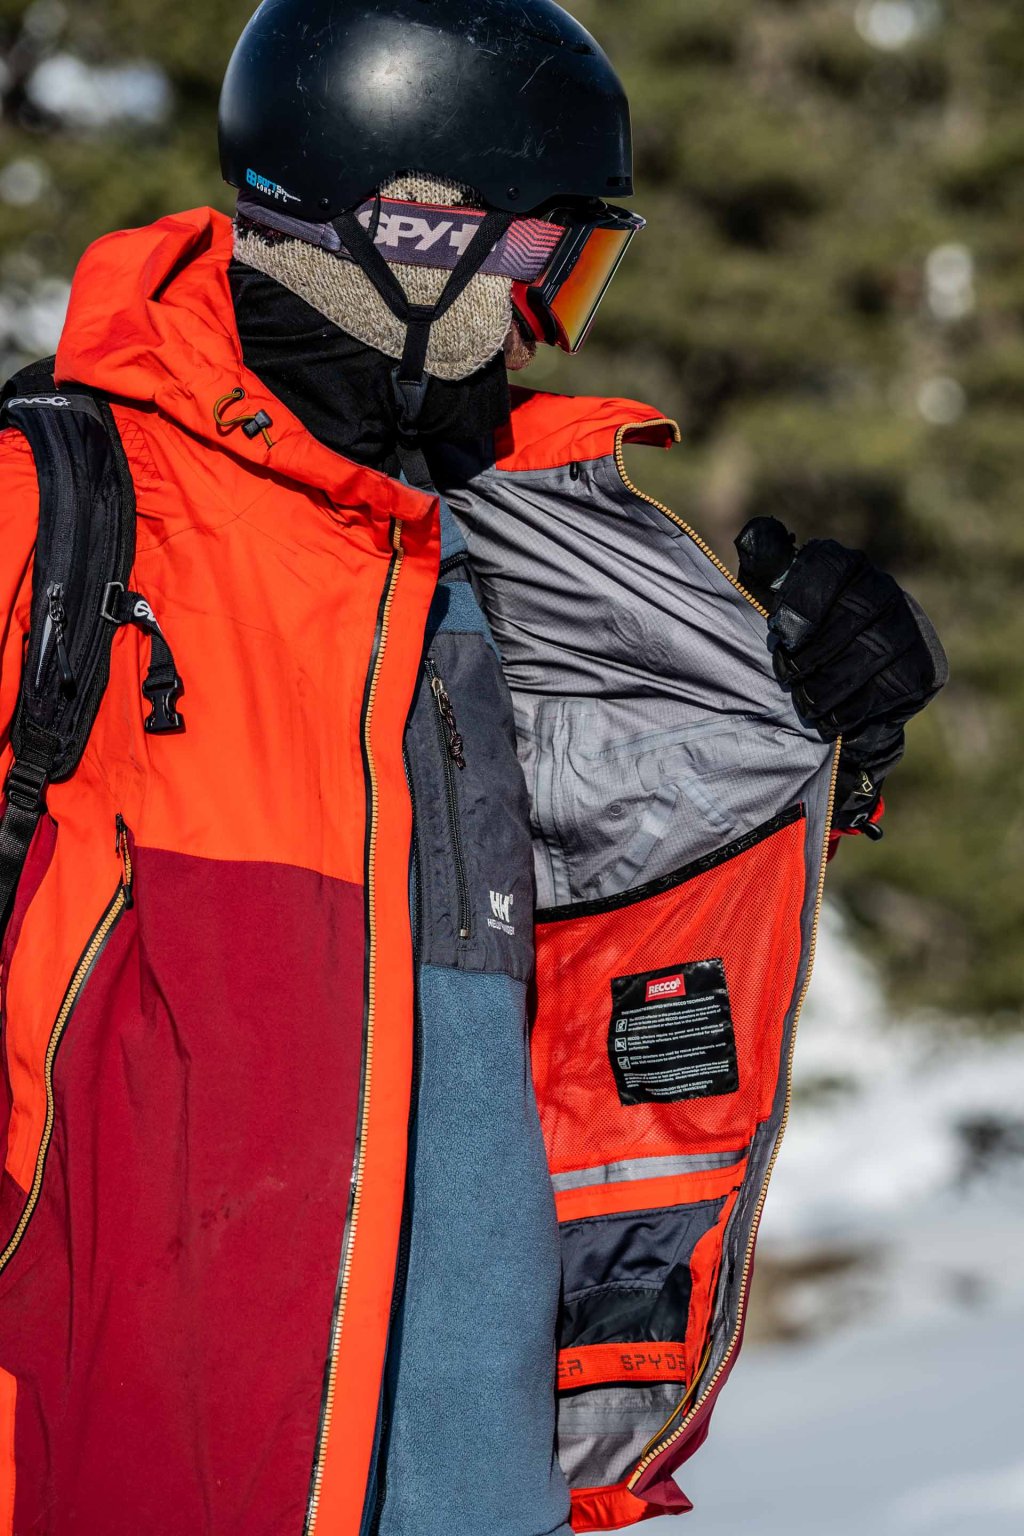 The mesh inside the jacket is ideal for storing things that need to stay warm, such as skins or gloves